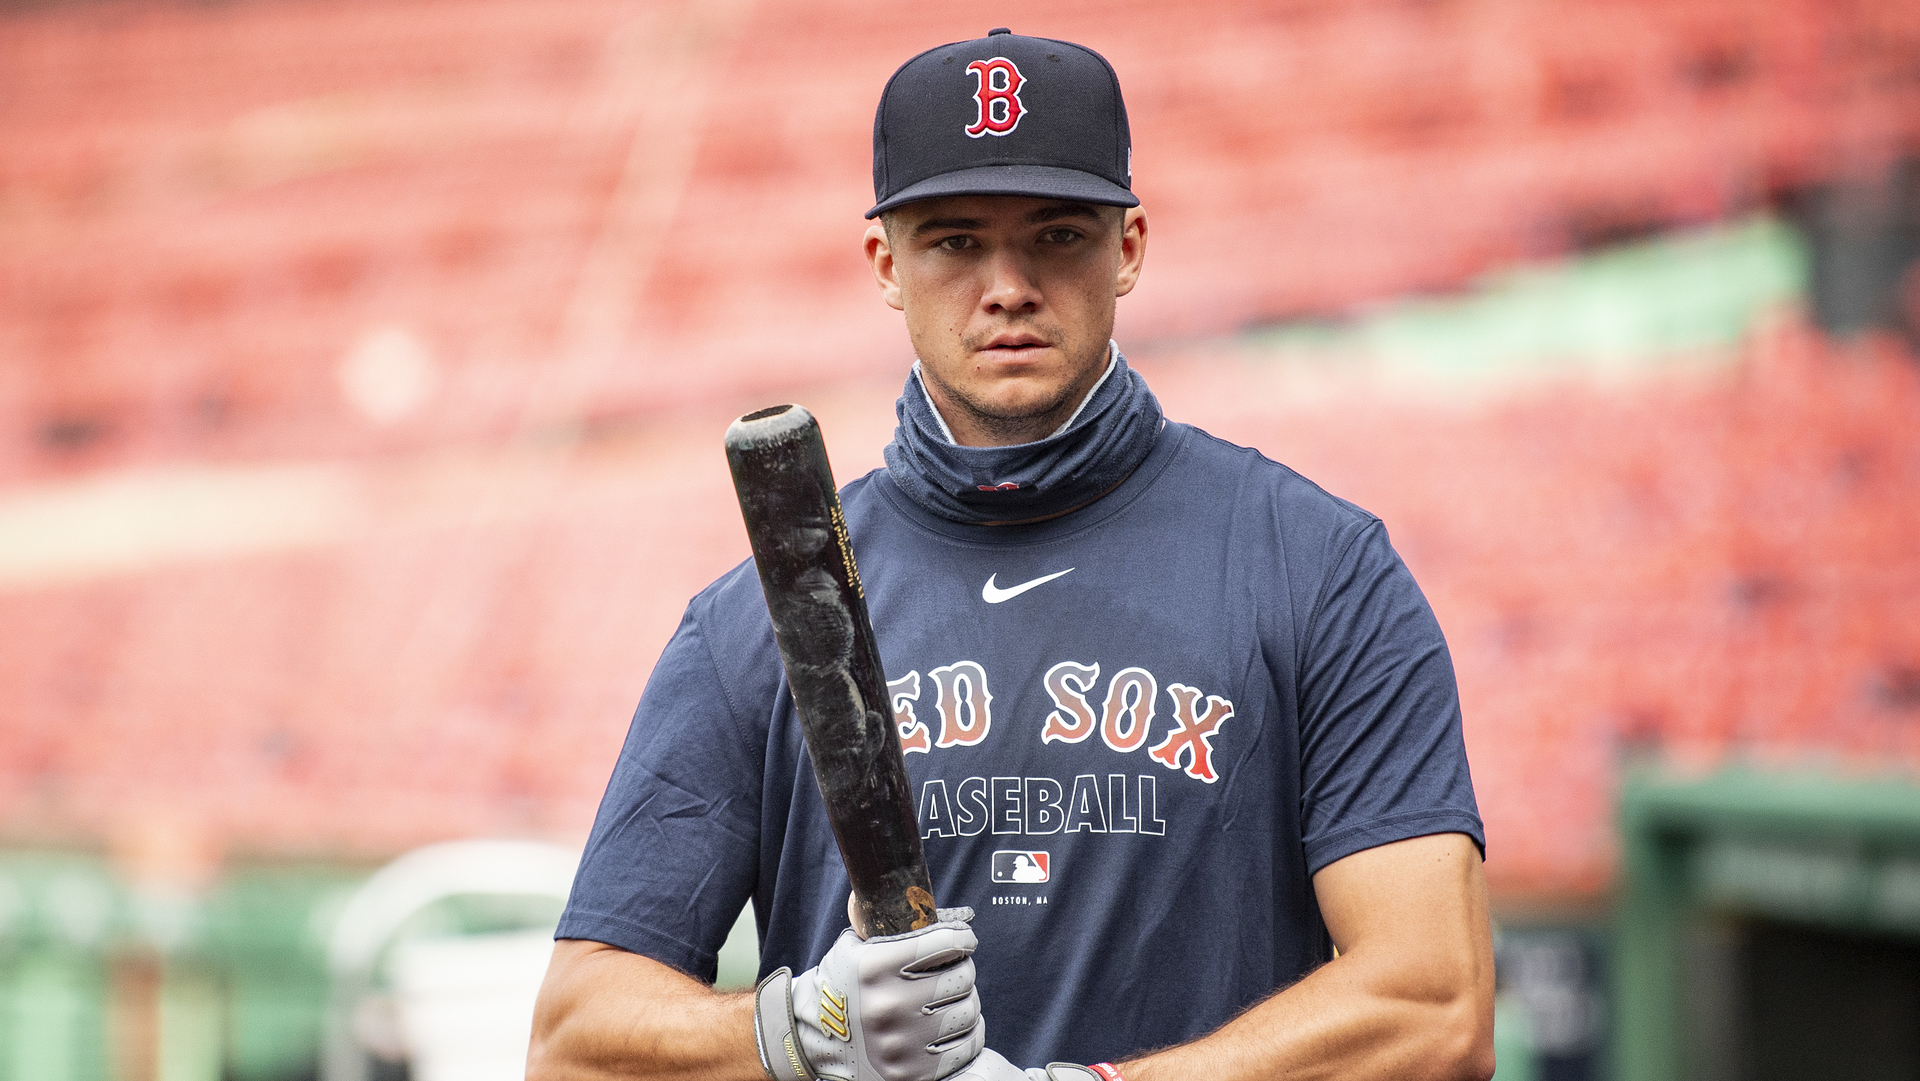 Bobby Dalbec is hammering the ball for Red Sox, and he has Jackie